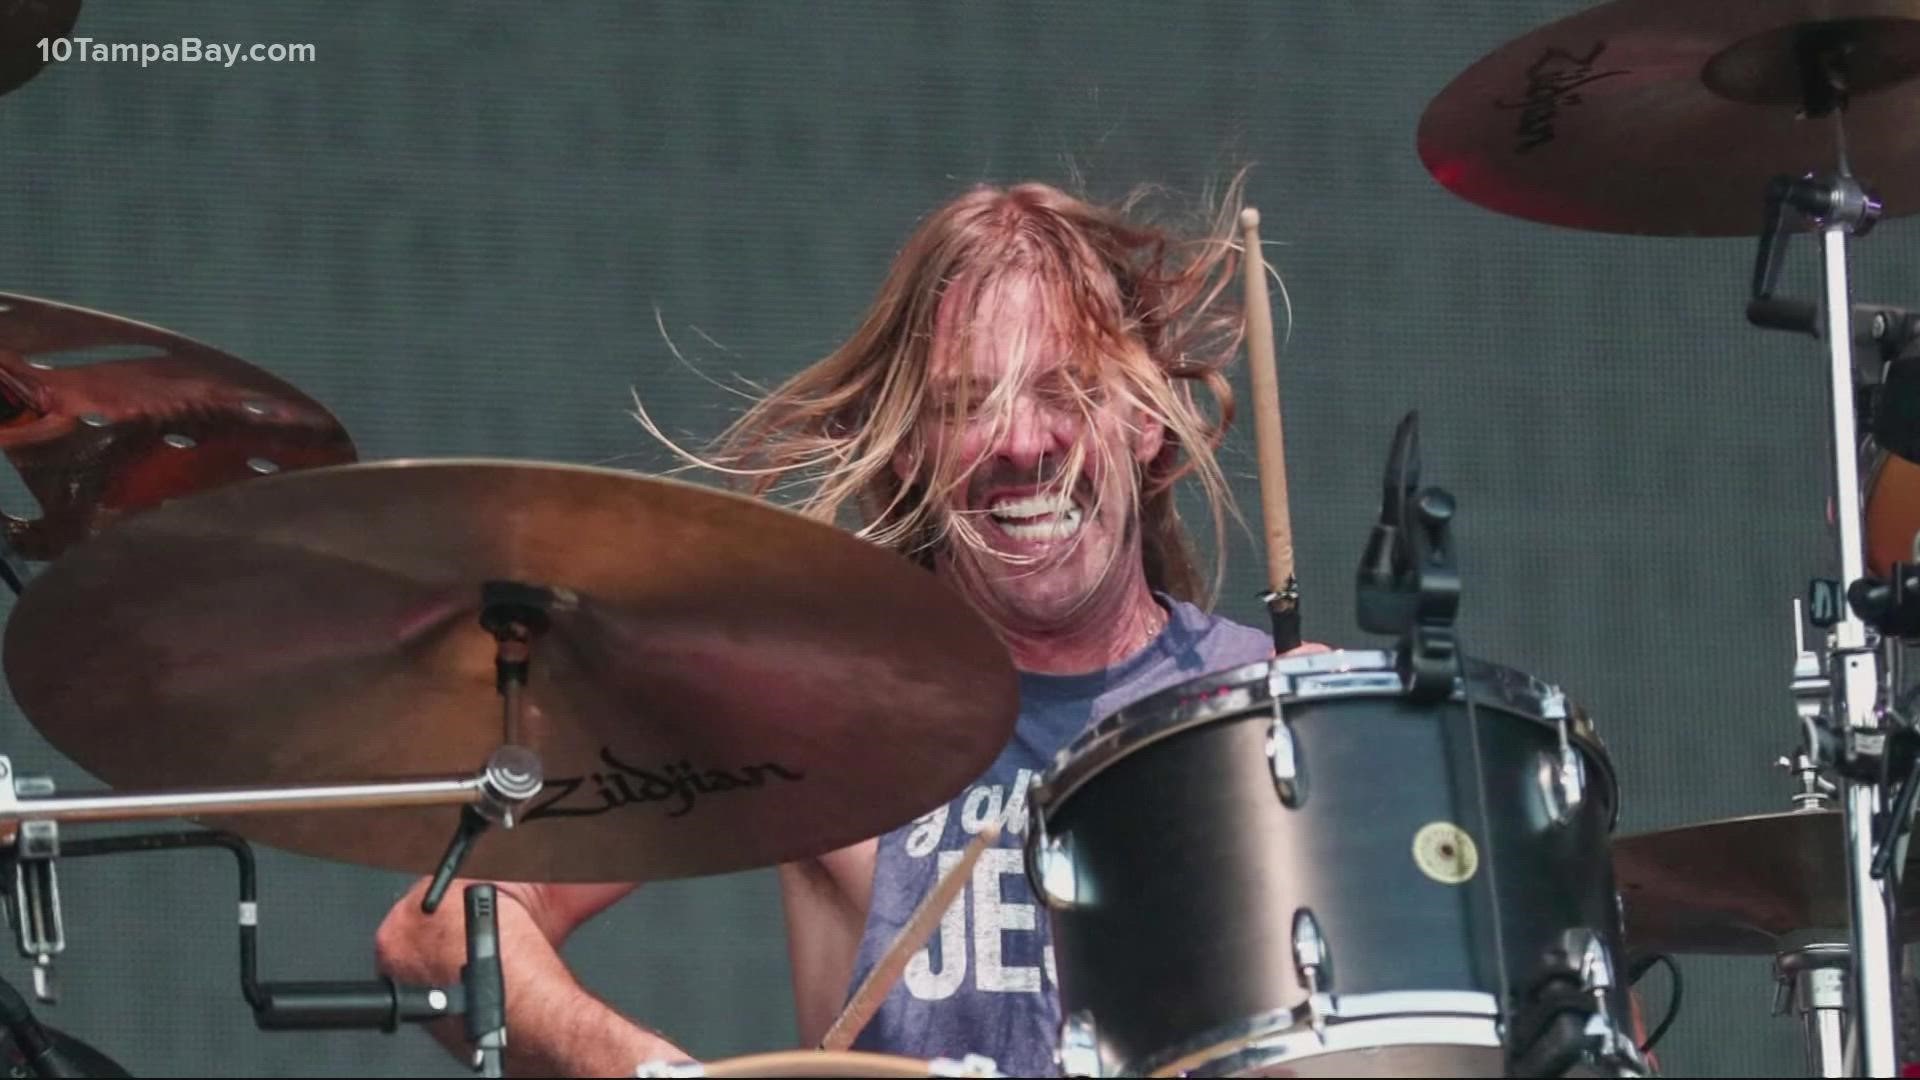 Tributes are pouring in for Taylor Hawkins, the drummer for Foo Fighters for 25 years, who died while on tour with the band.